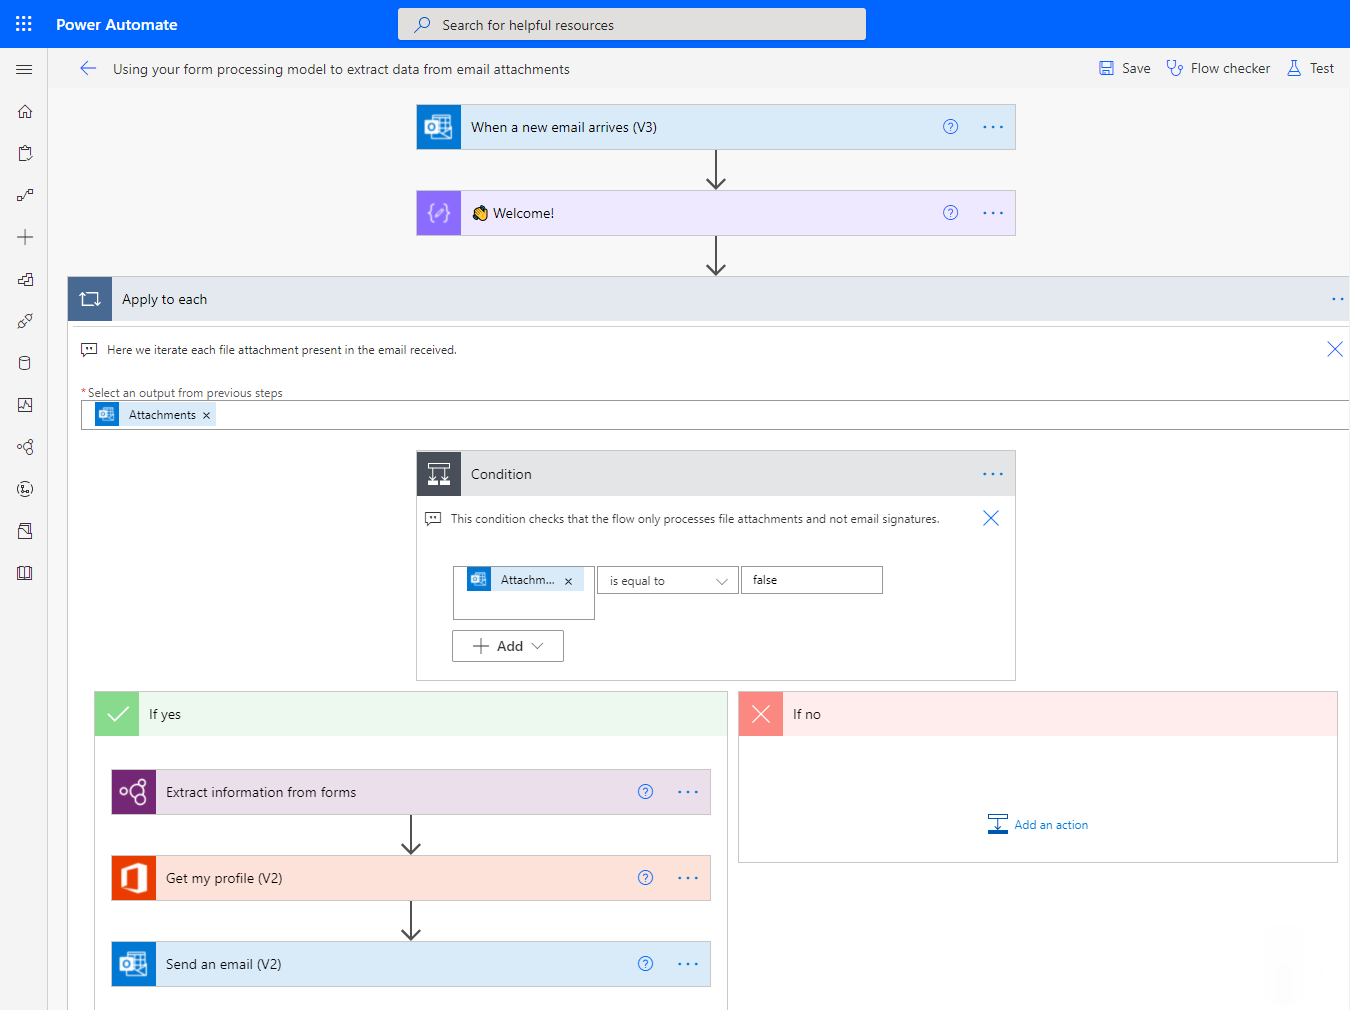 Screenshot of Power Automate shows a flow that processes documents received by email and extracts the data using AI Builder